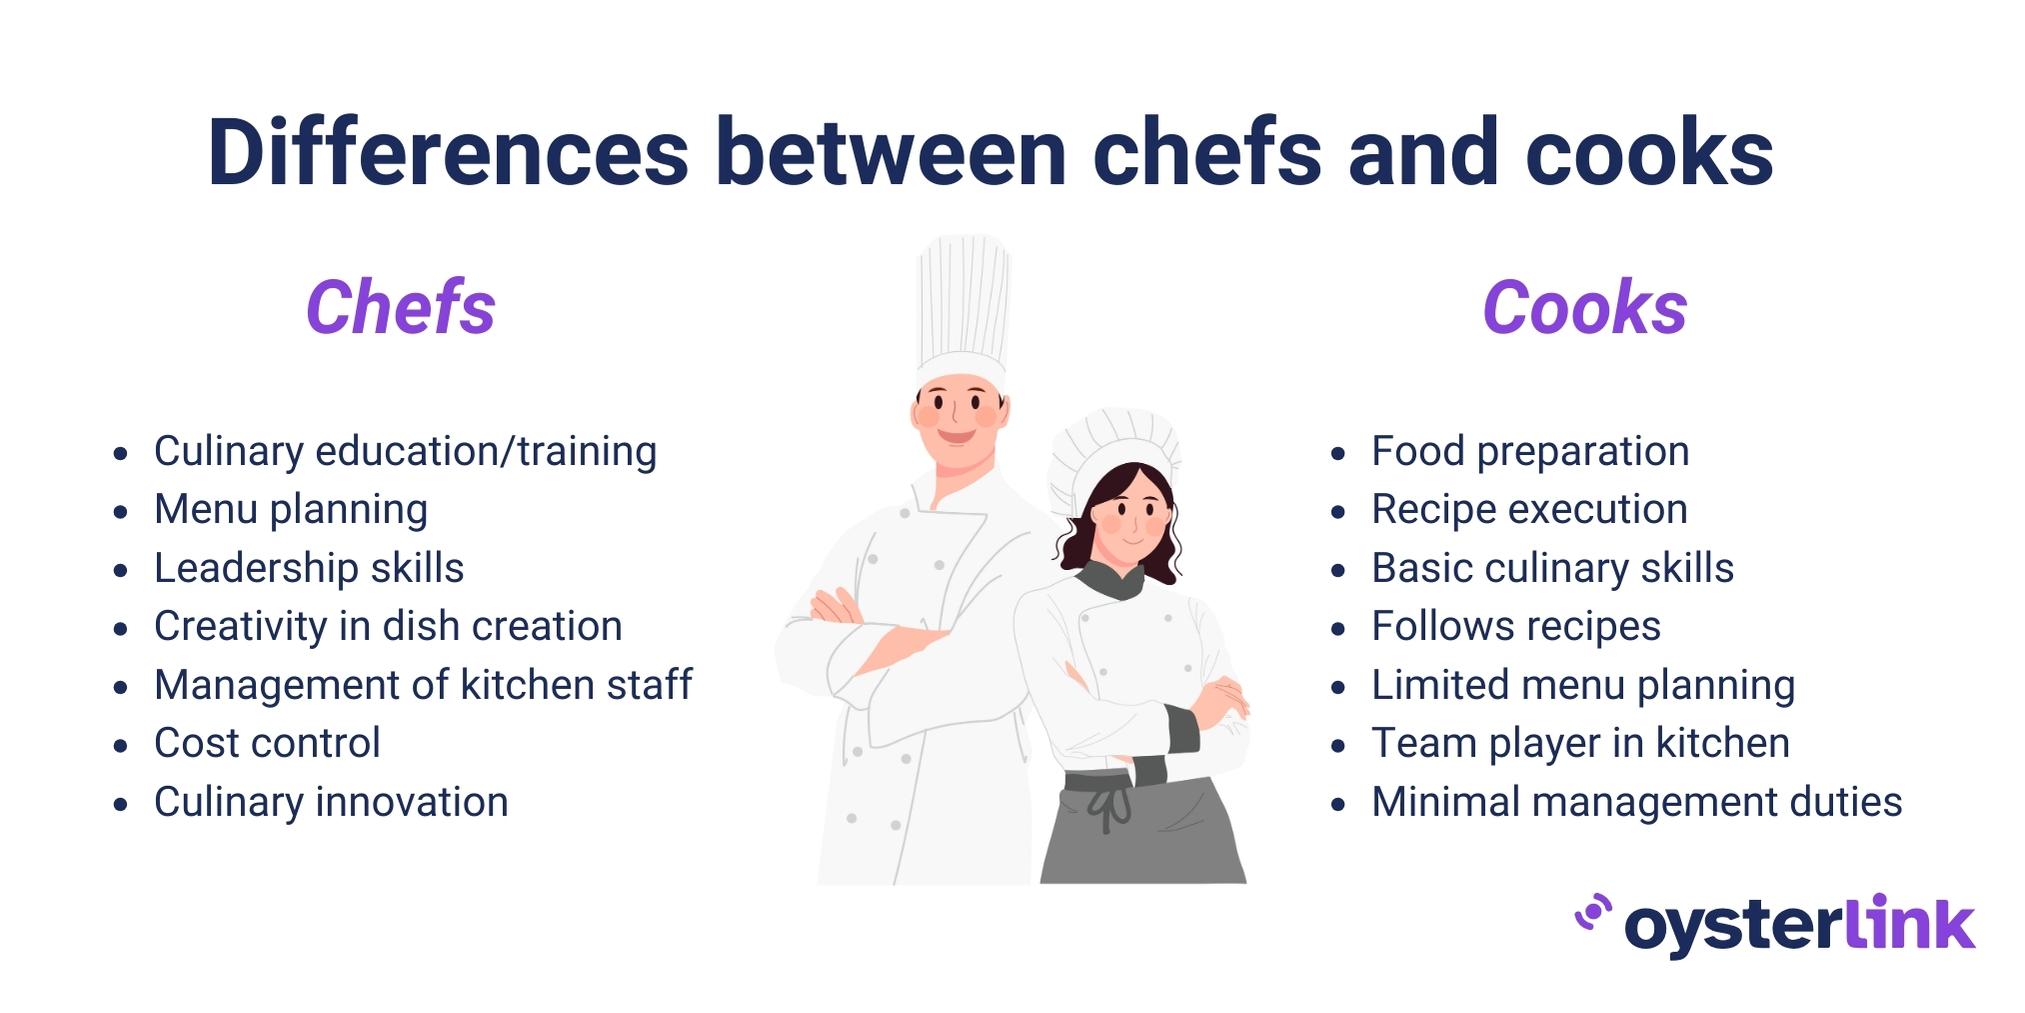 Differences between chefs and cooks